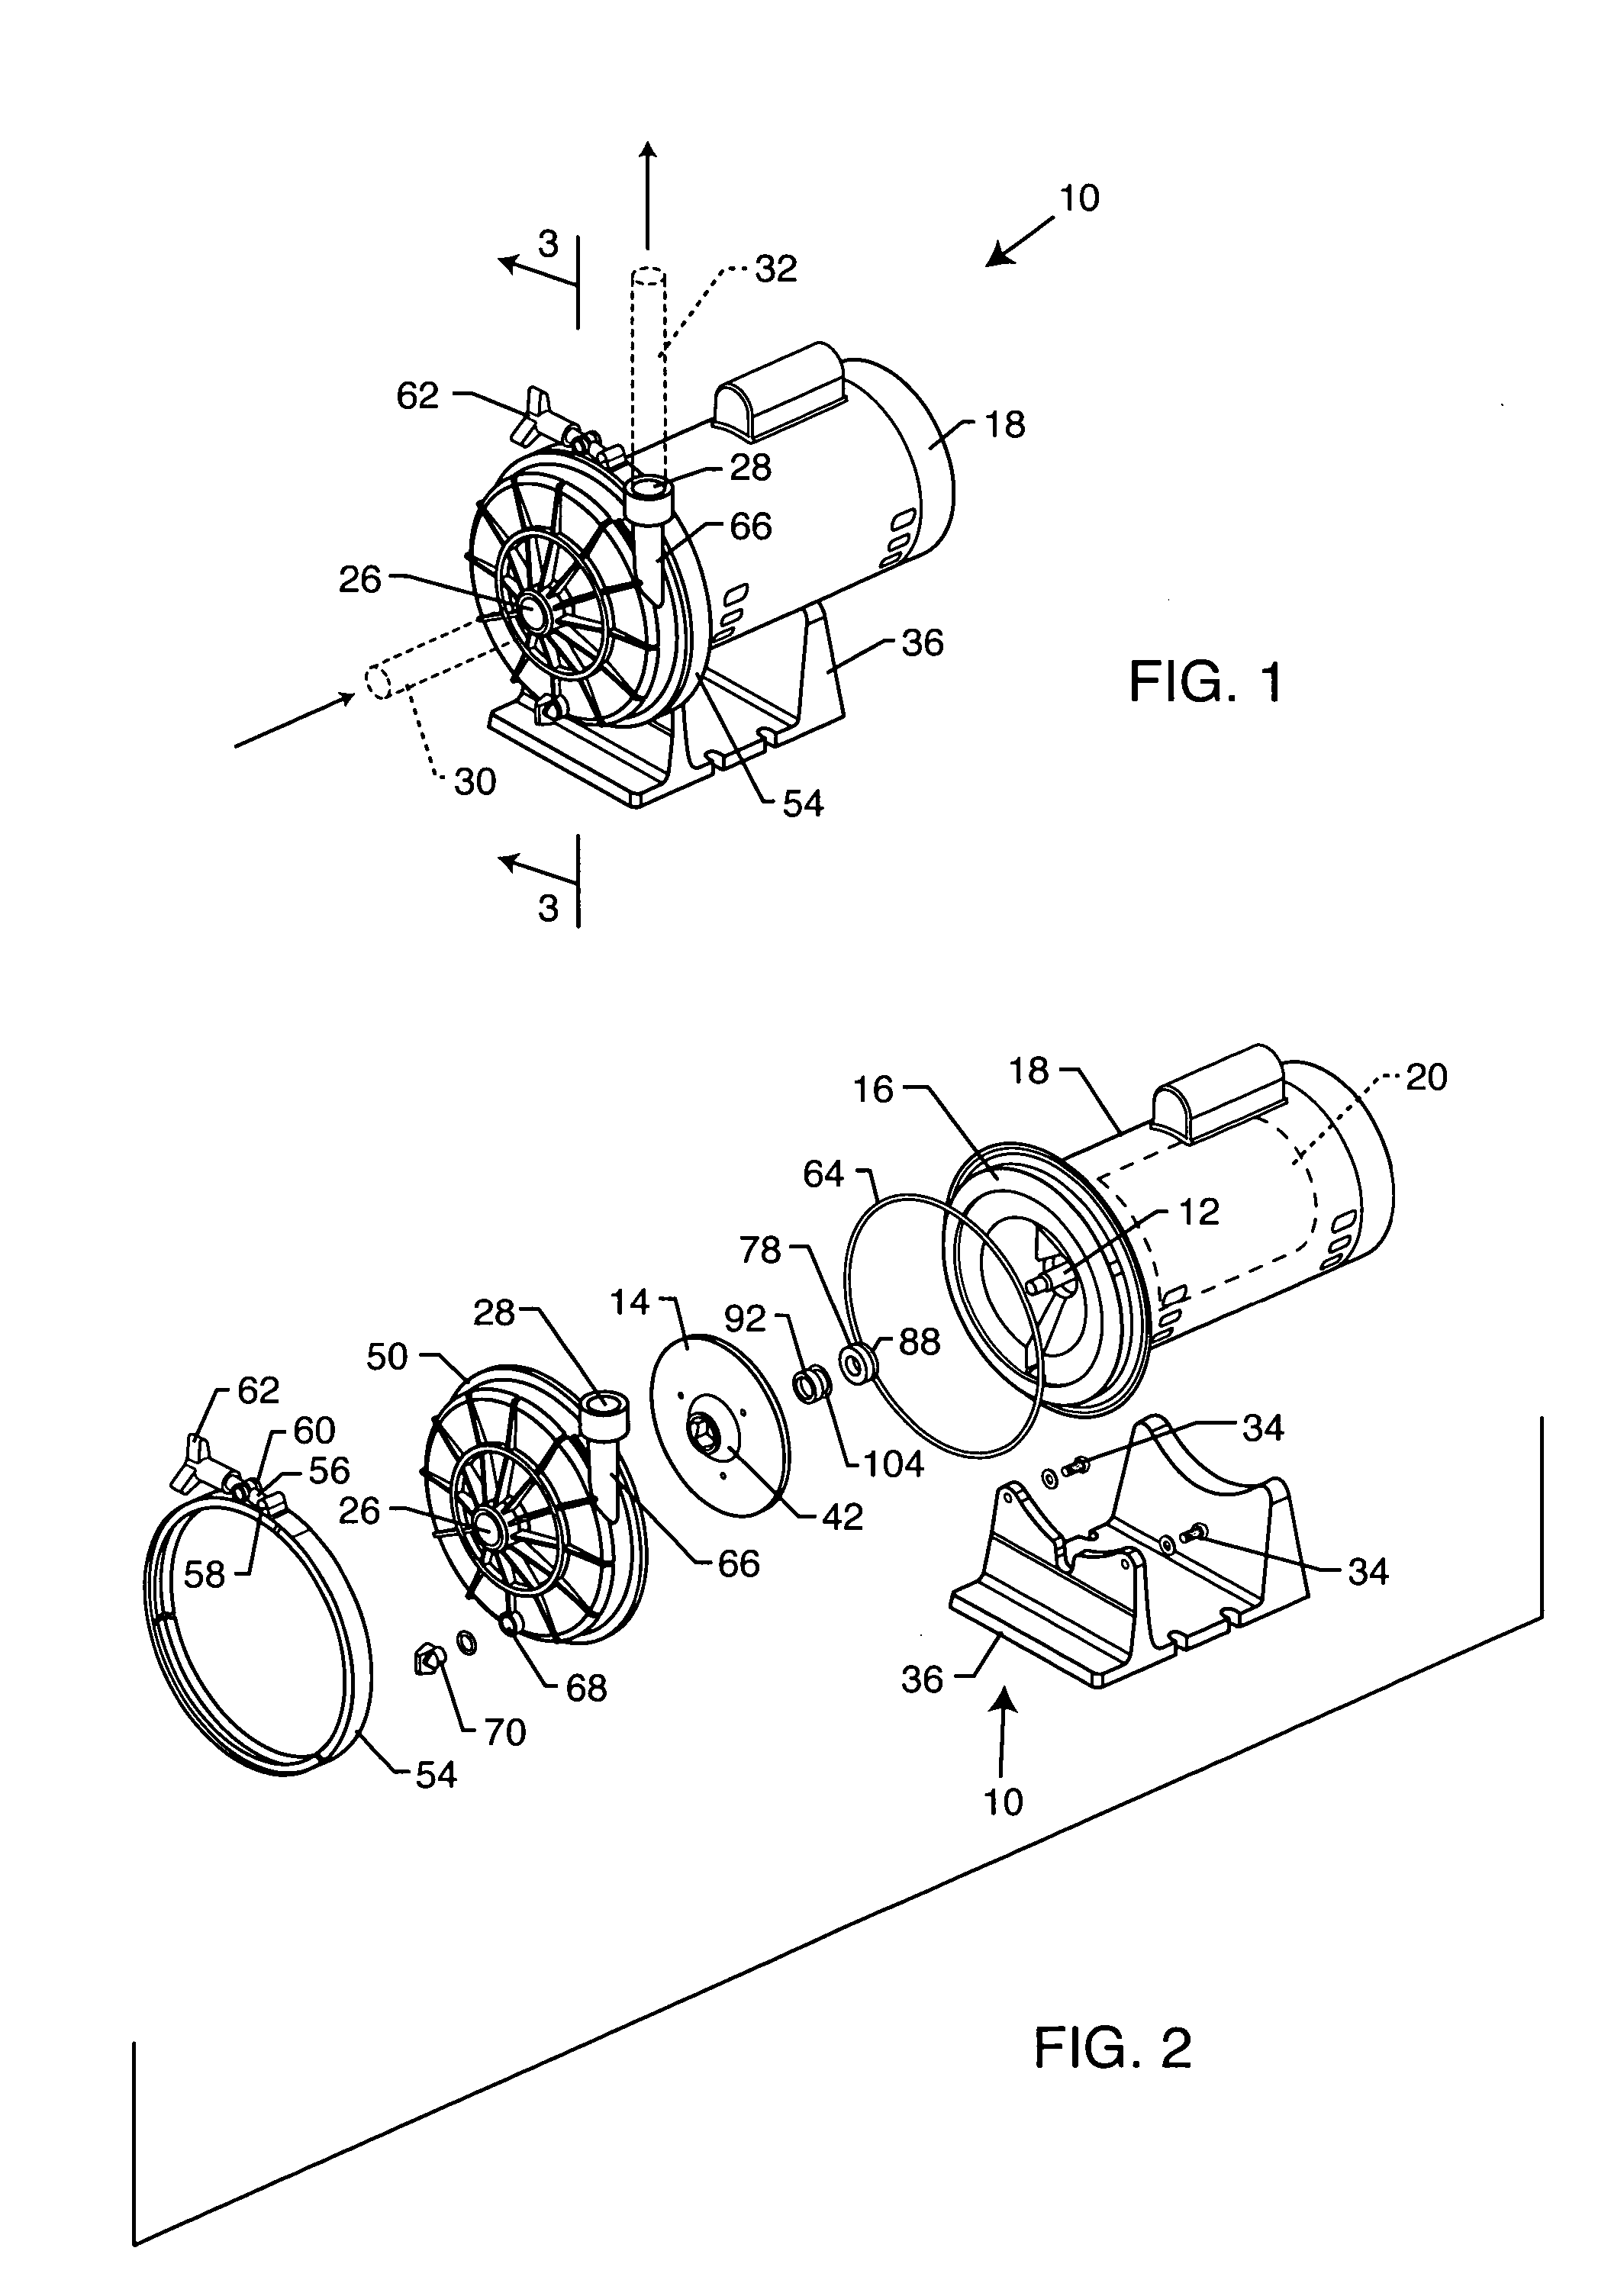 Motor-driven pump for pool or spa